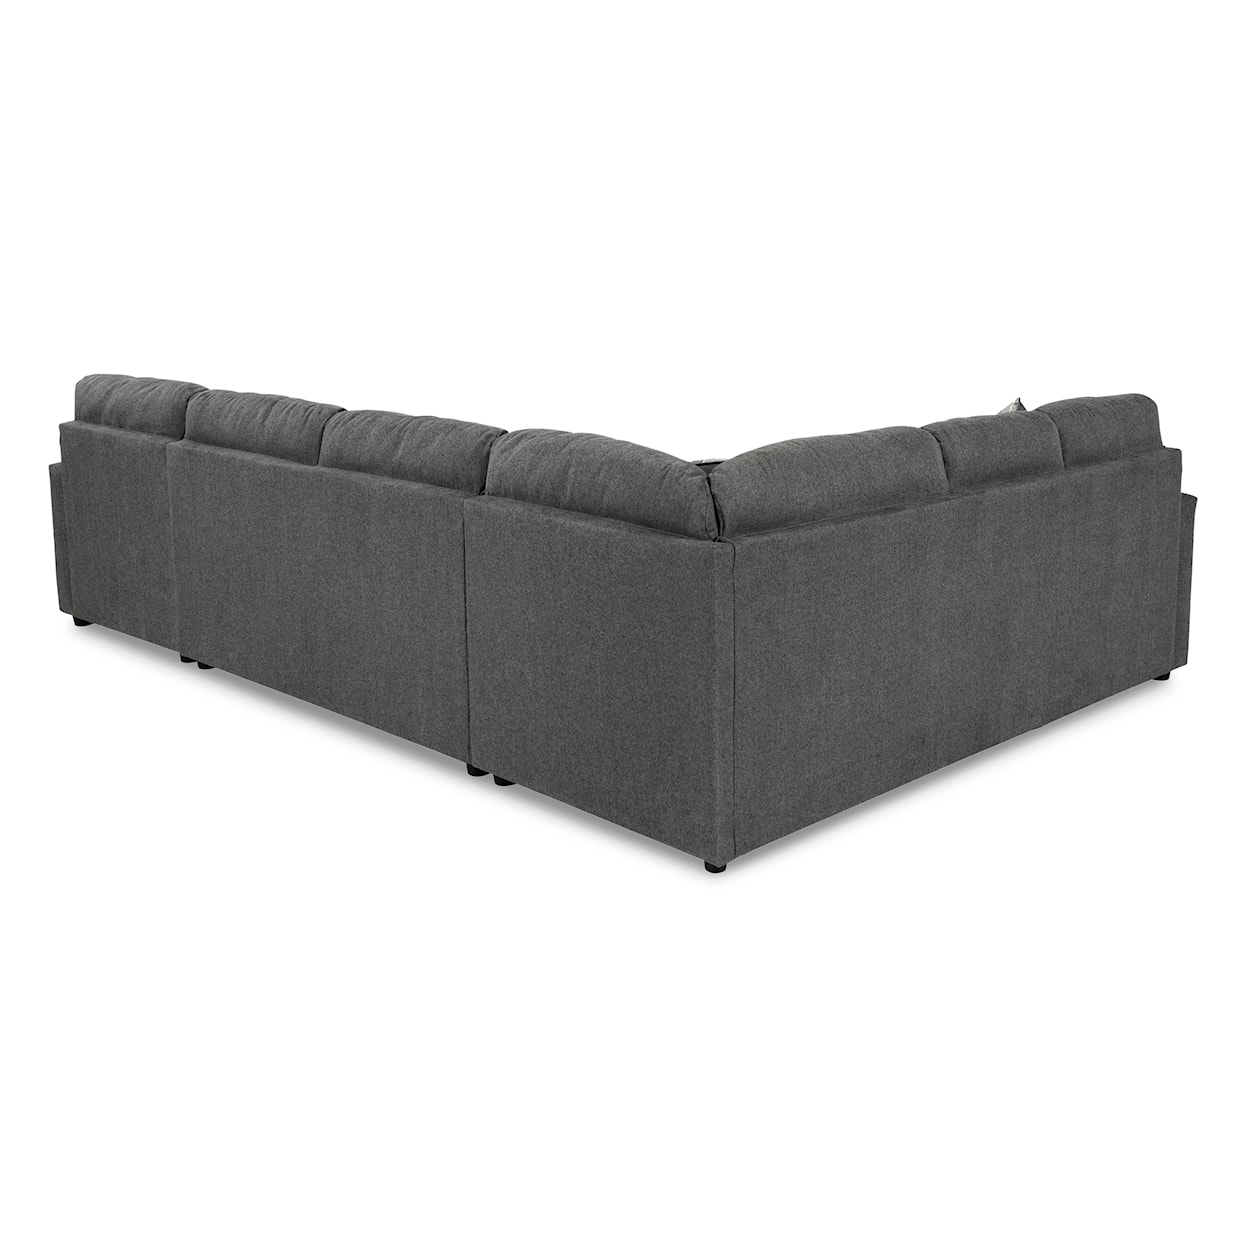 StyleLine Edenfield 3-Piece Sectional with Chaise